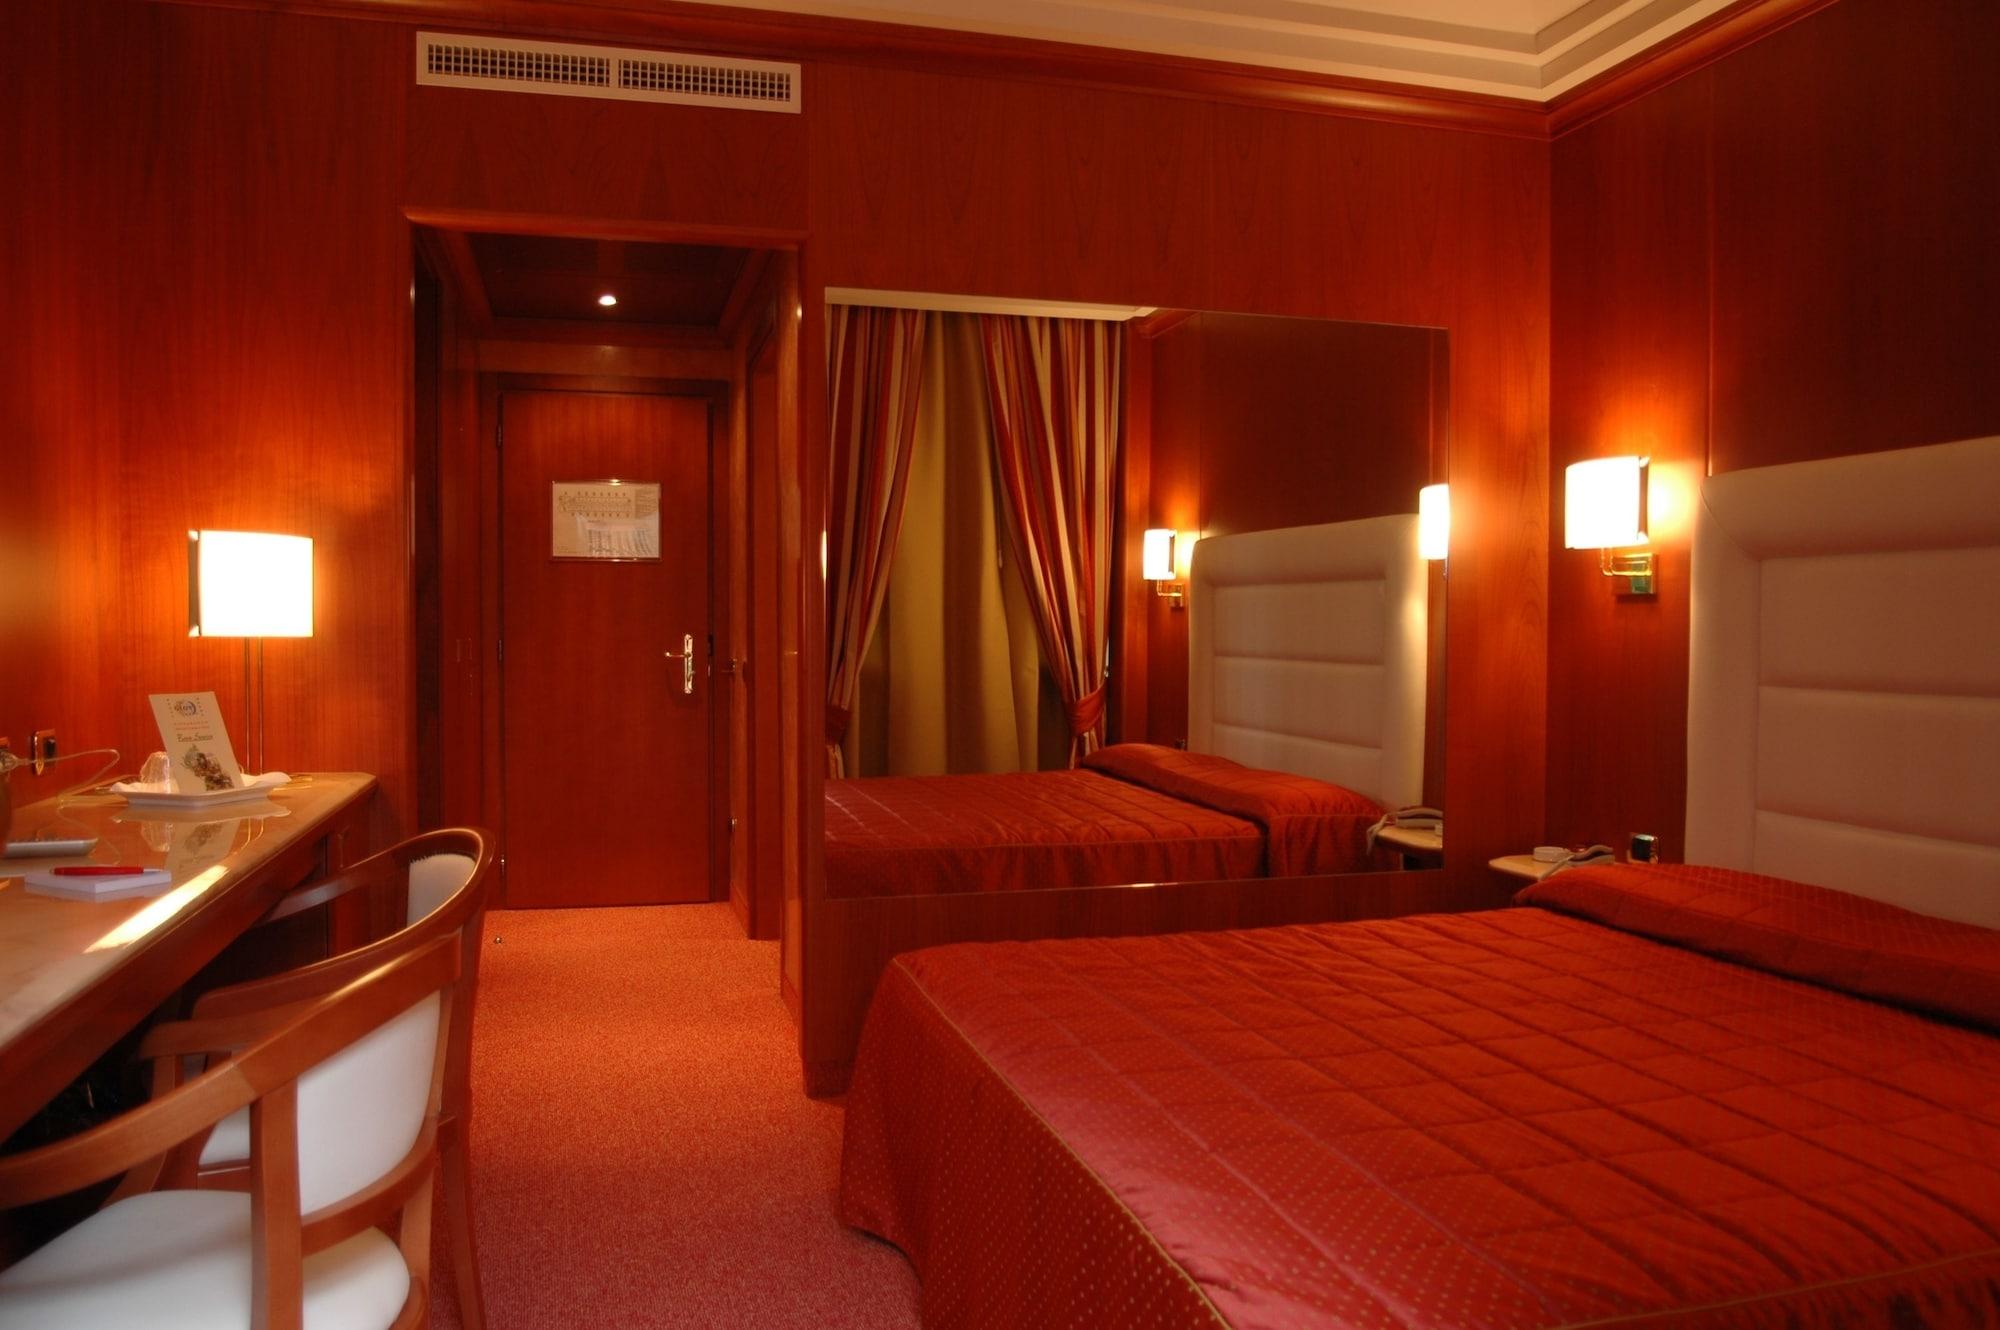 As Hotel Monza Room photo